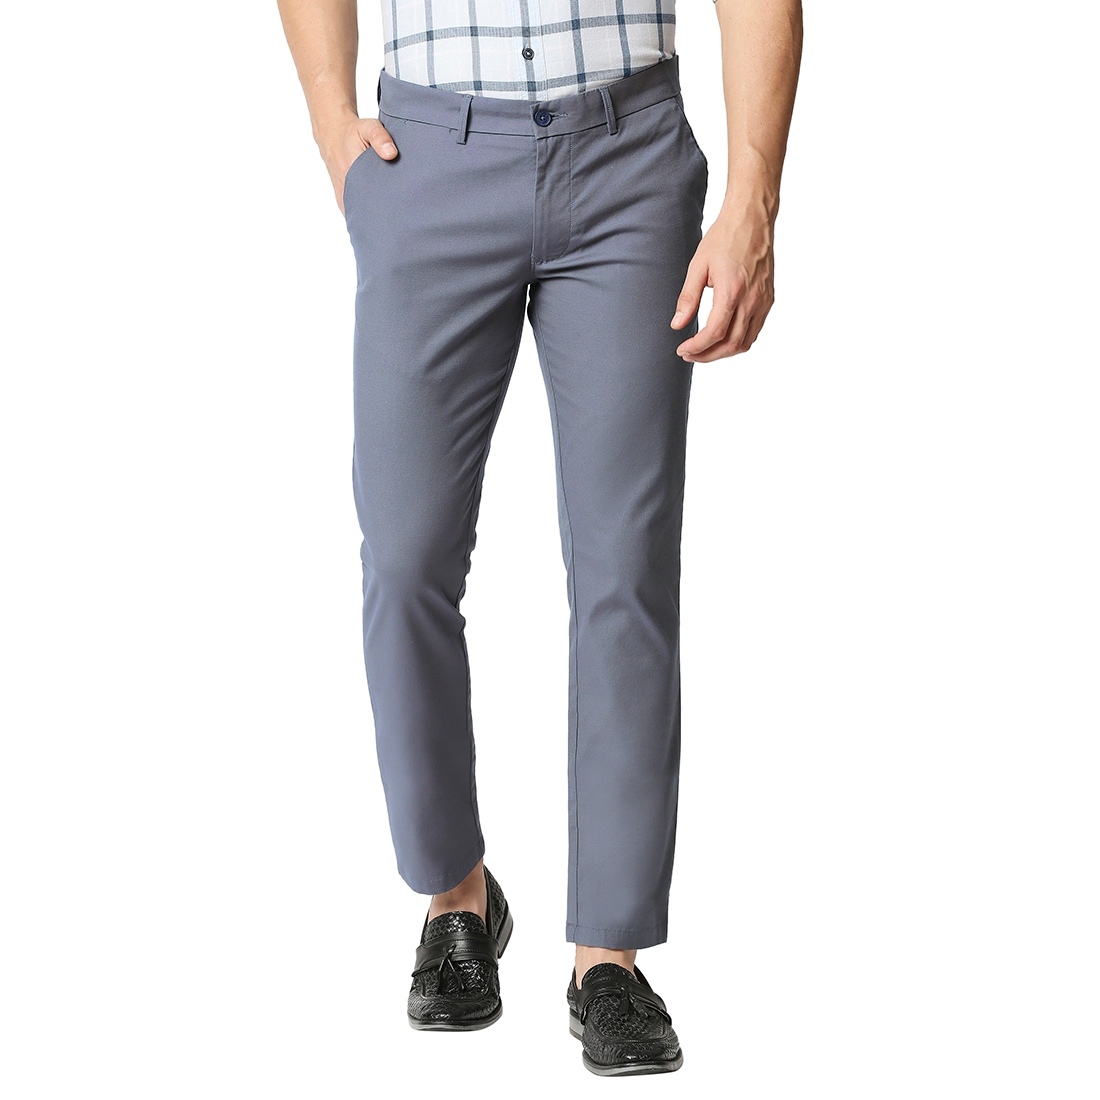 Basics | BASICS CASUAL SELF LIGHT BLUE COTTON POLYESTER STRETCH TAPERED TROUSERS 